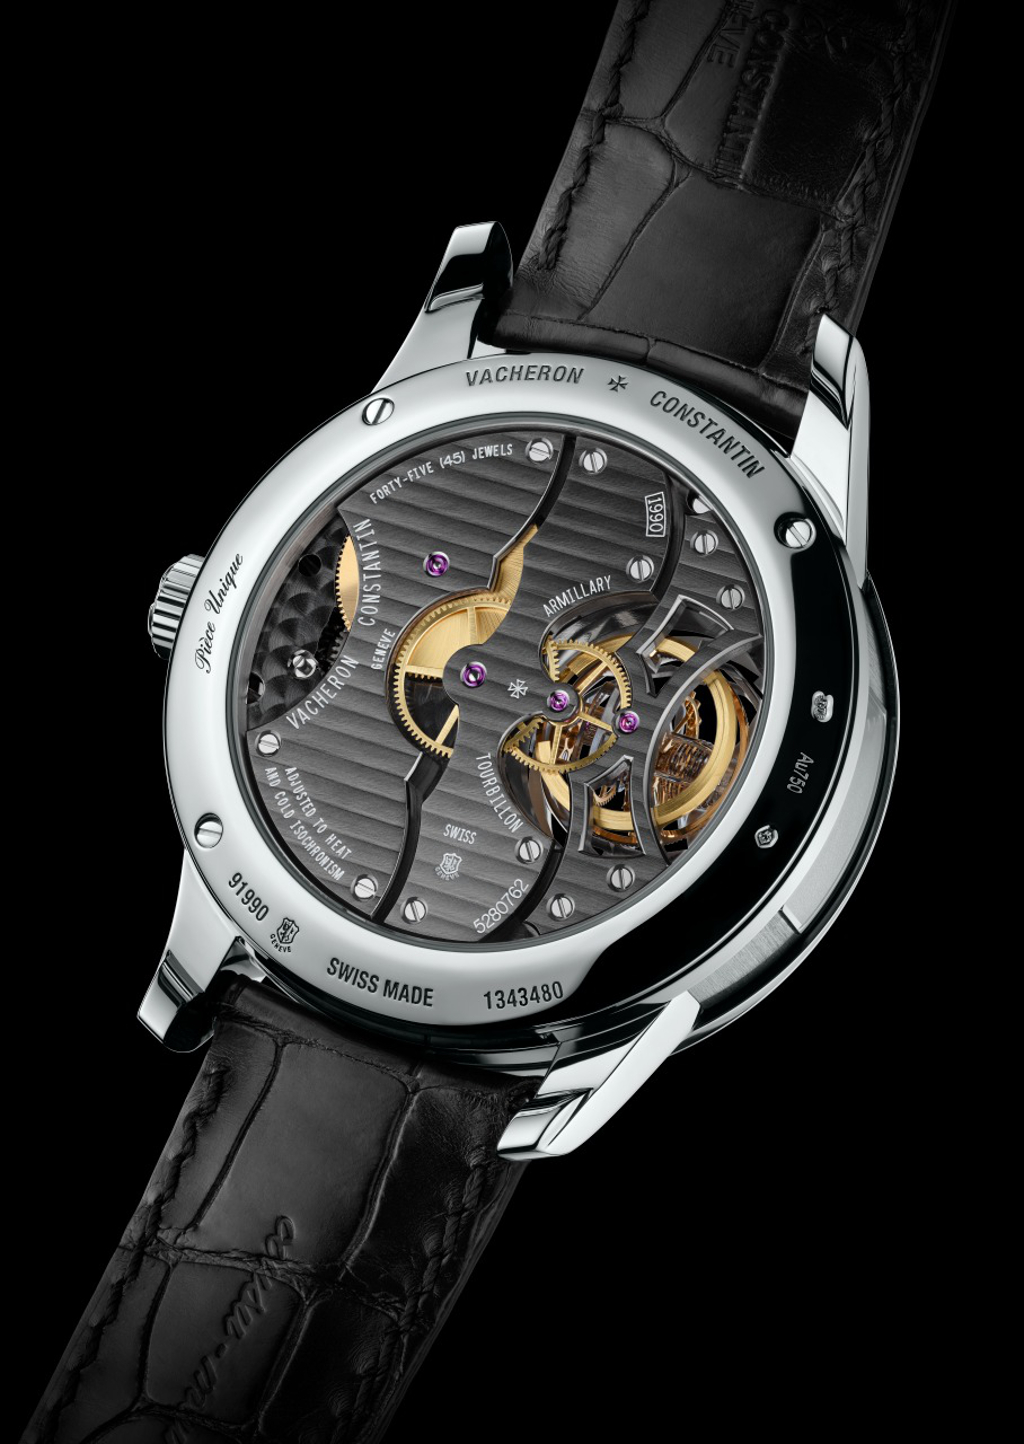 The caseback of the watch replica . Notice the intricate finishing of the movement. 